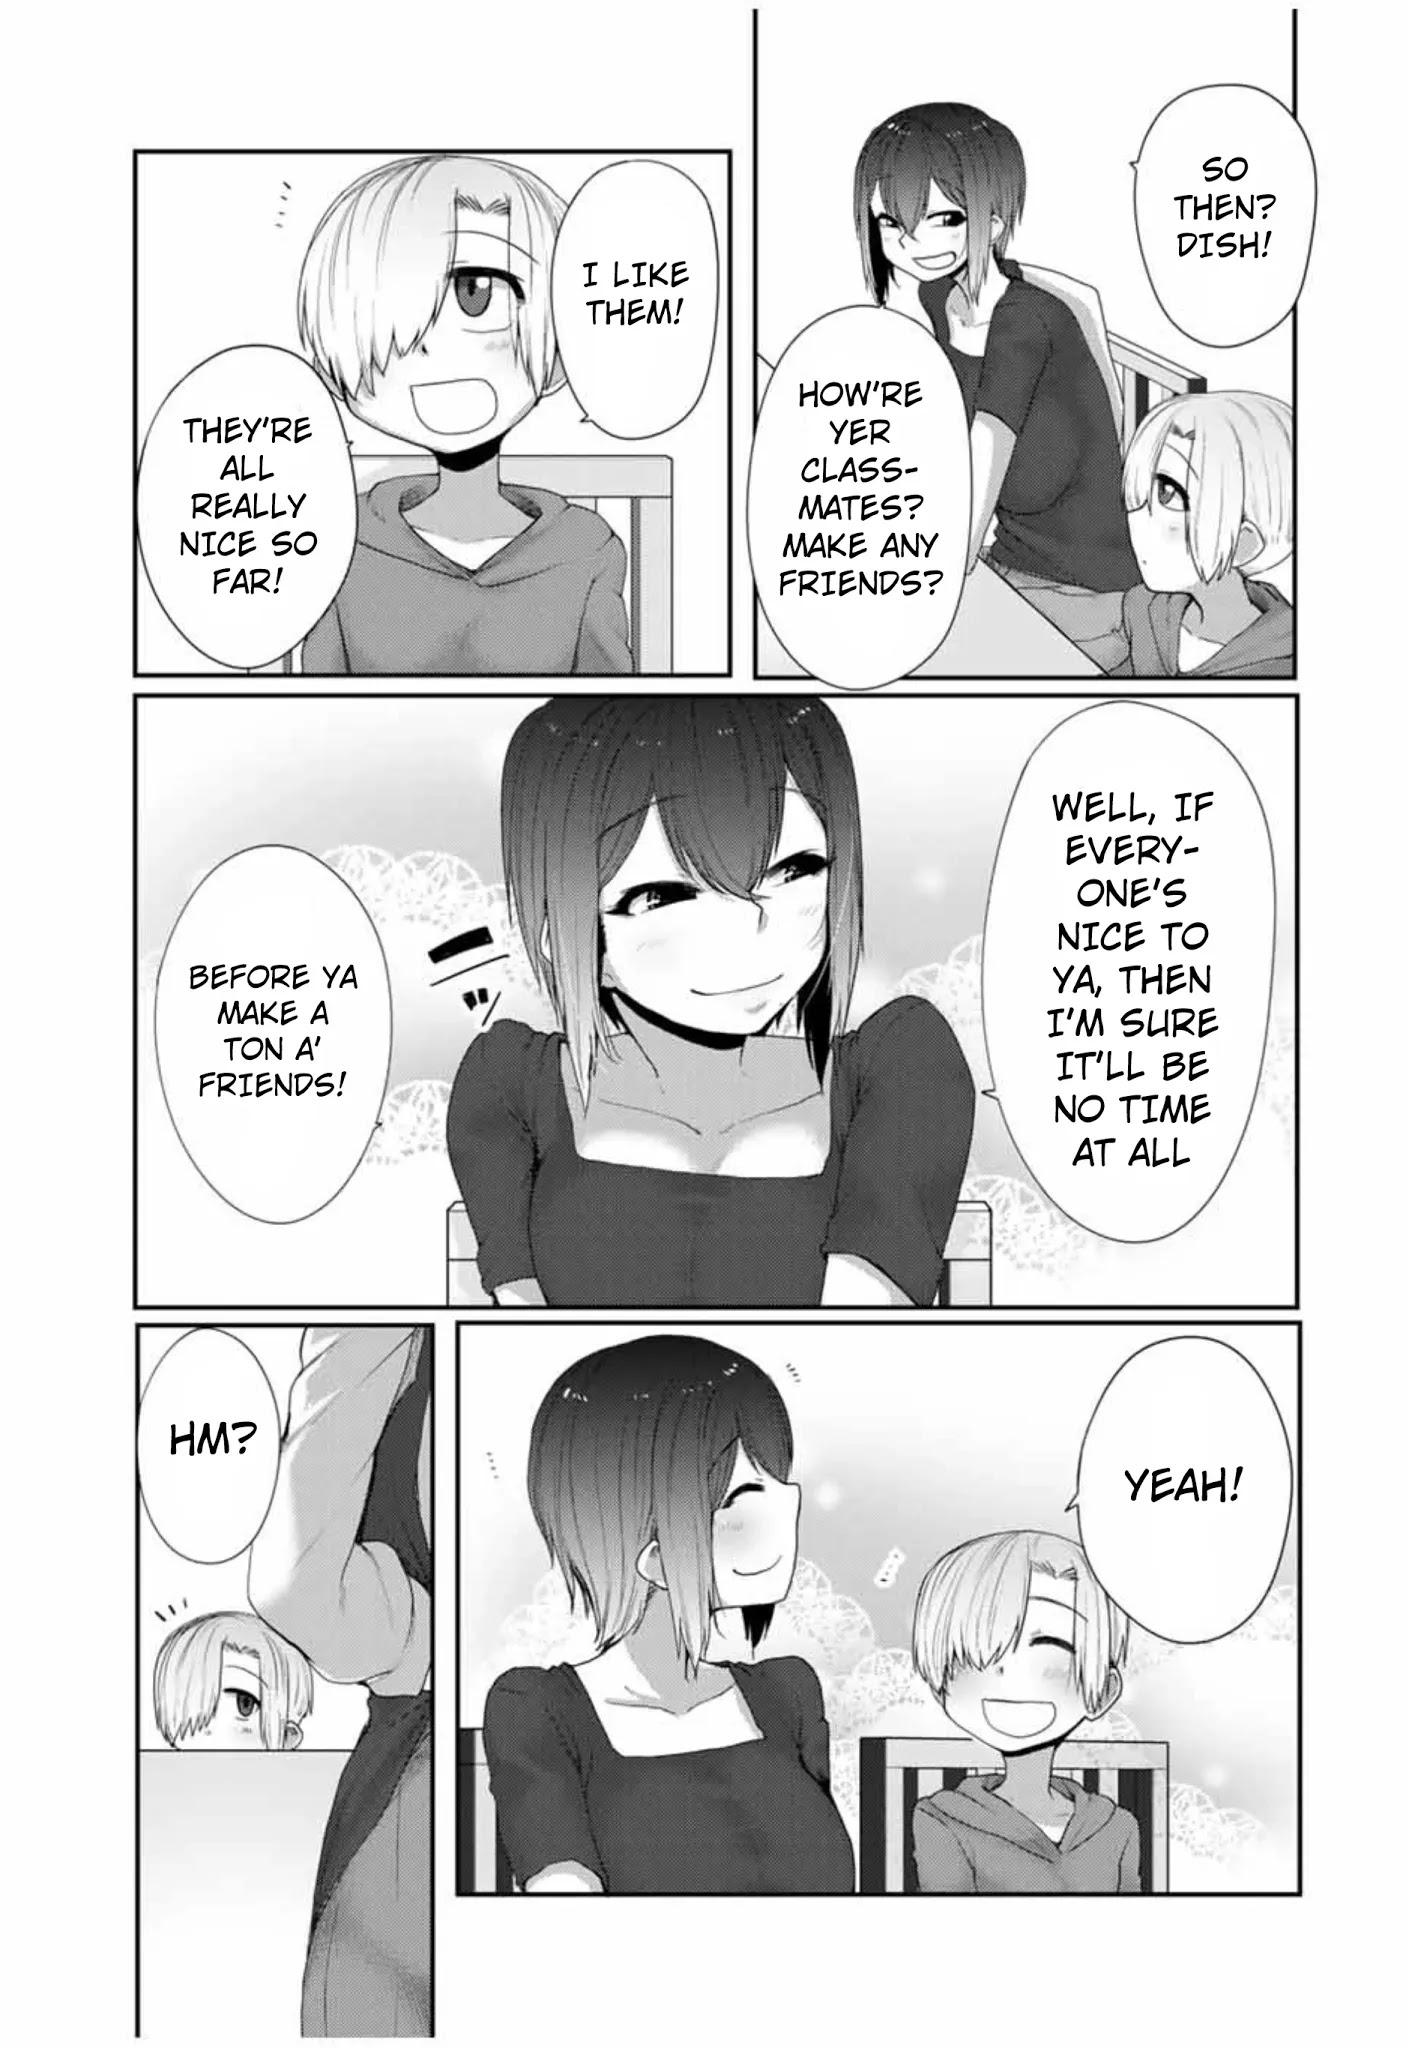 The Girl with a Kansai Accent and the Pure Boy - Chapter 17 Page 2